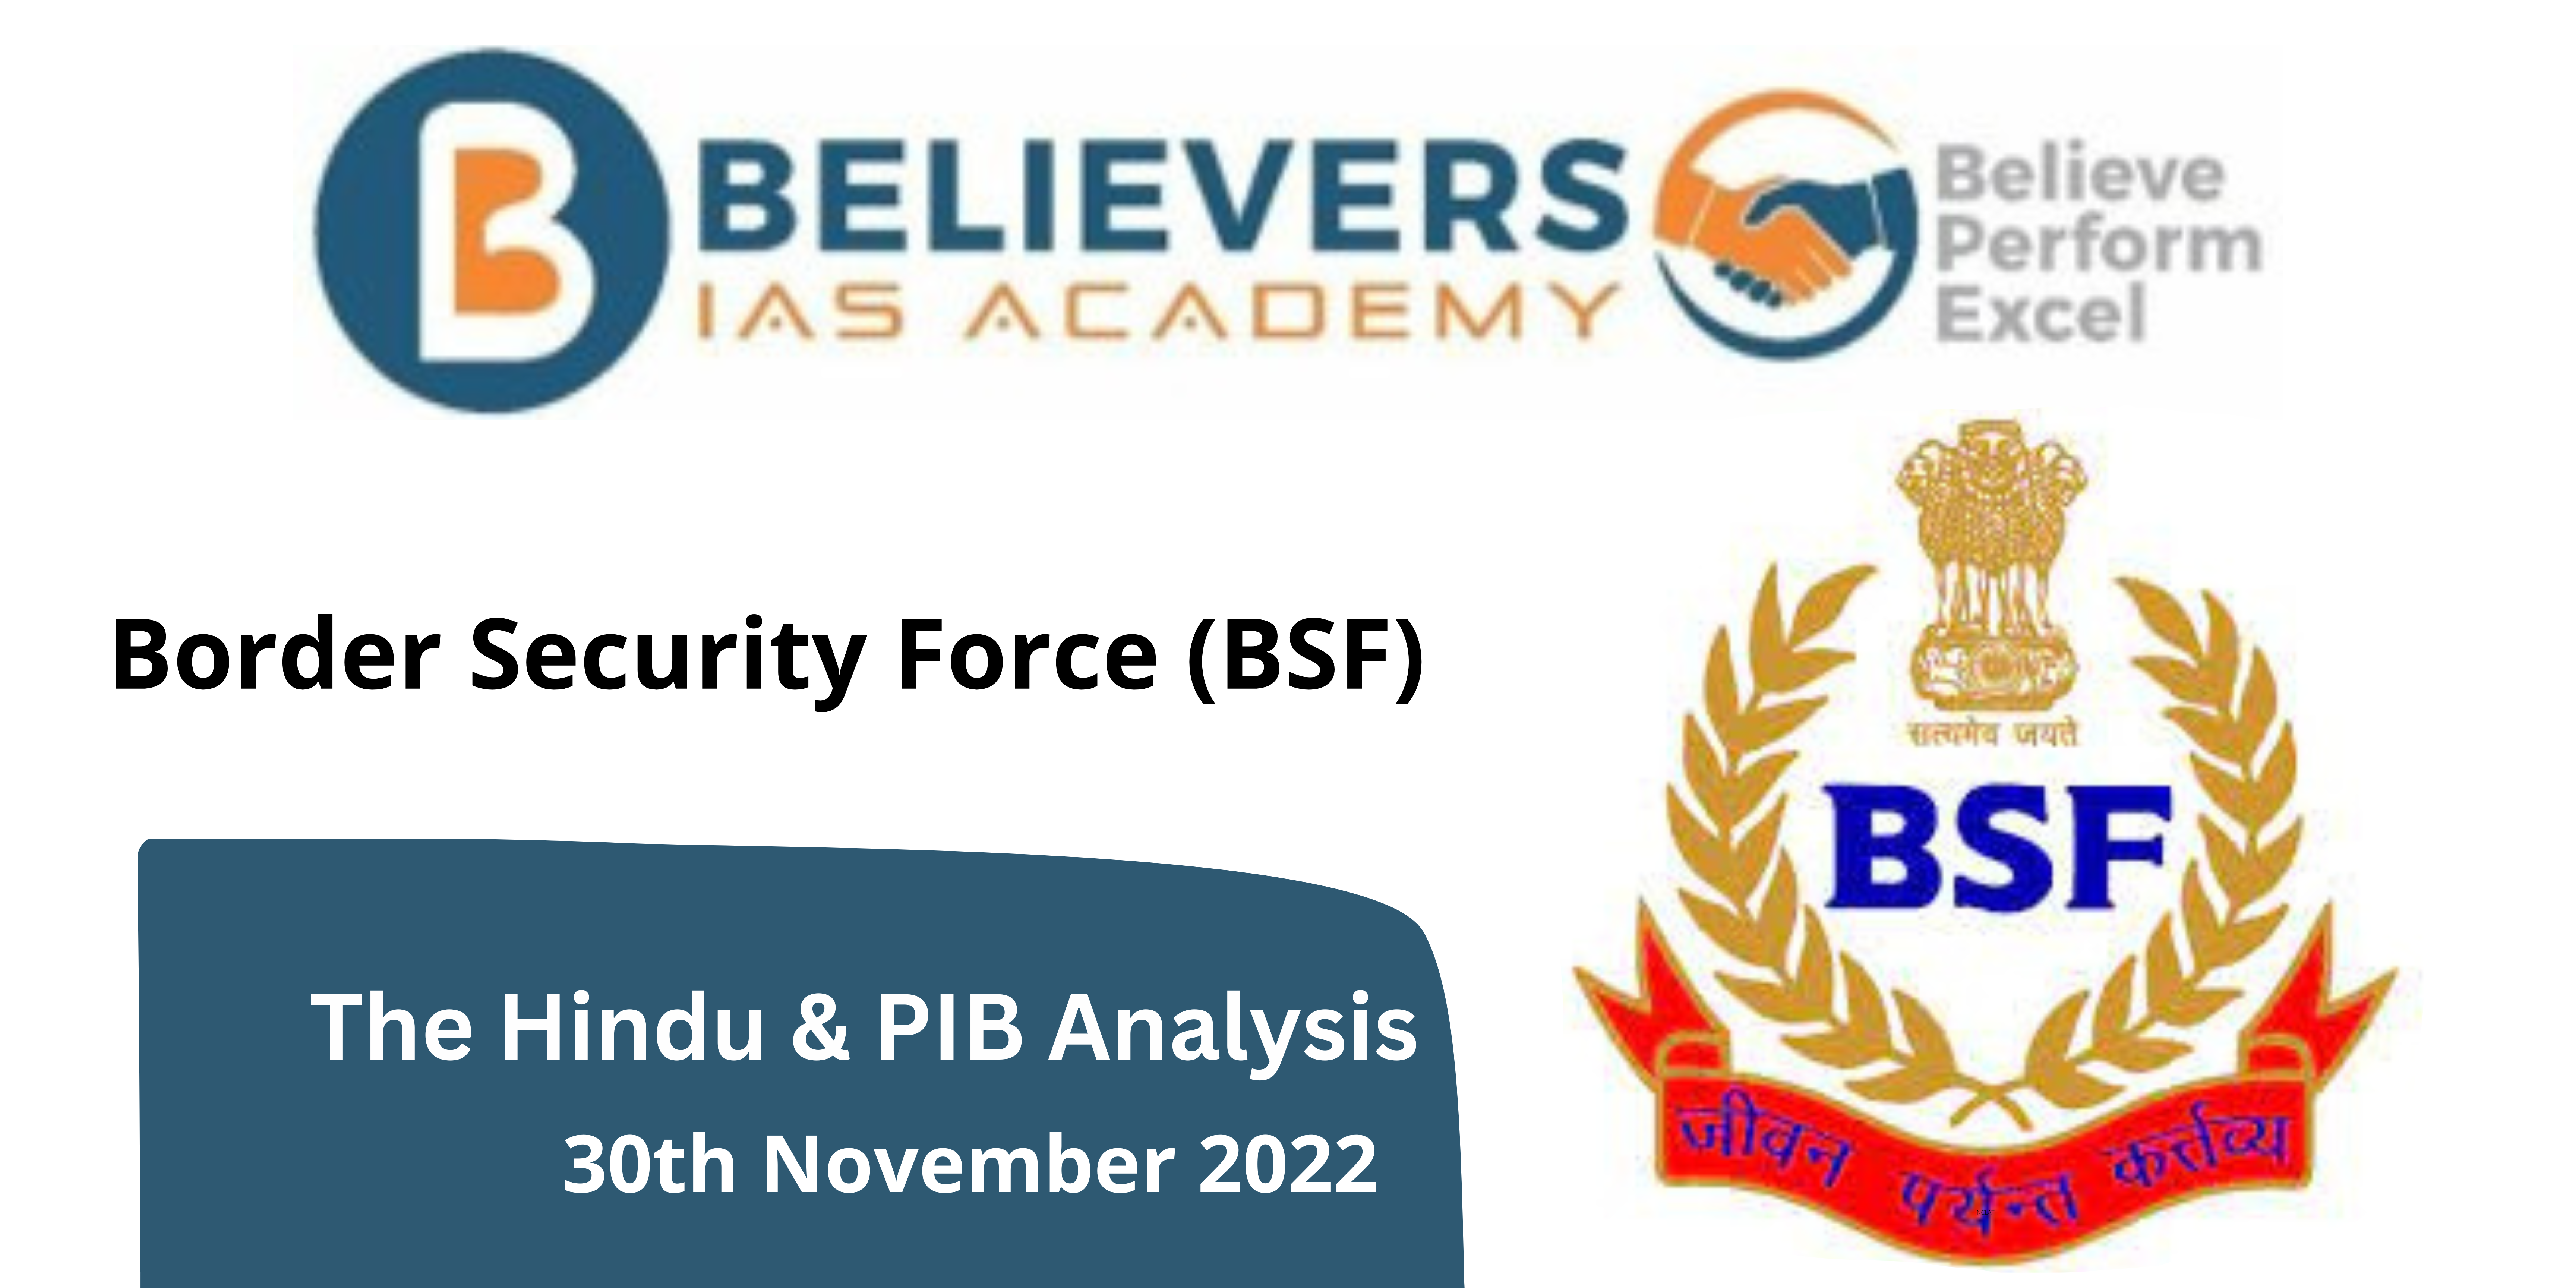 Border Security Force: A Detailed Overview